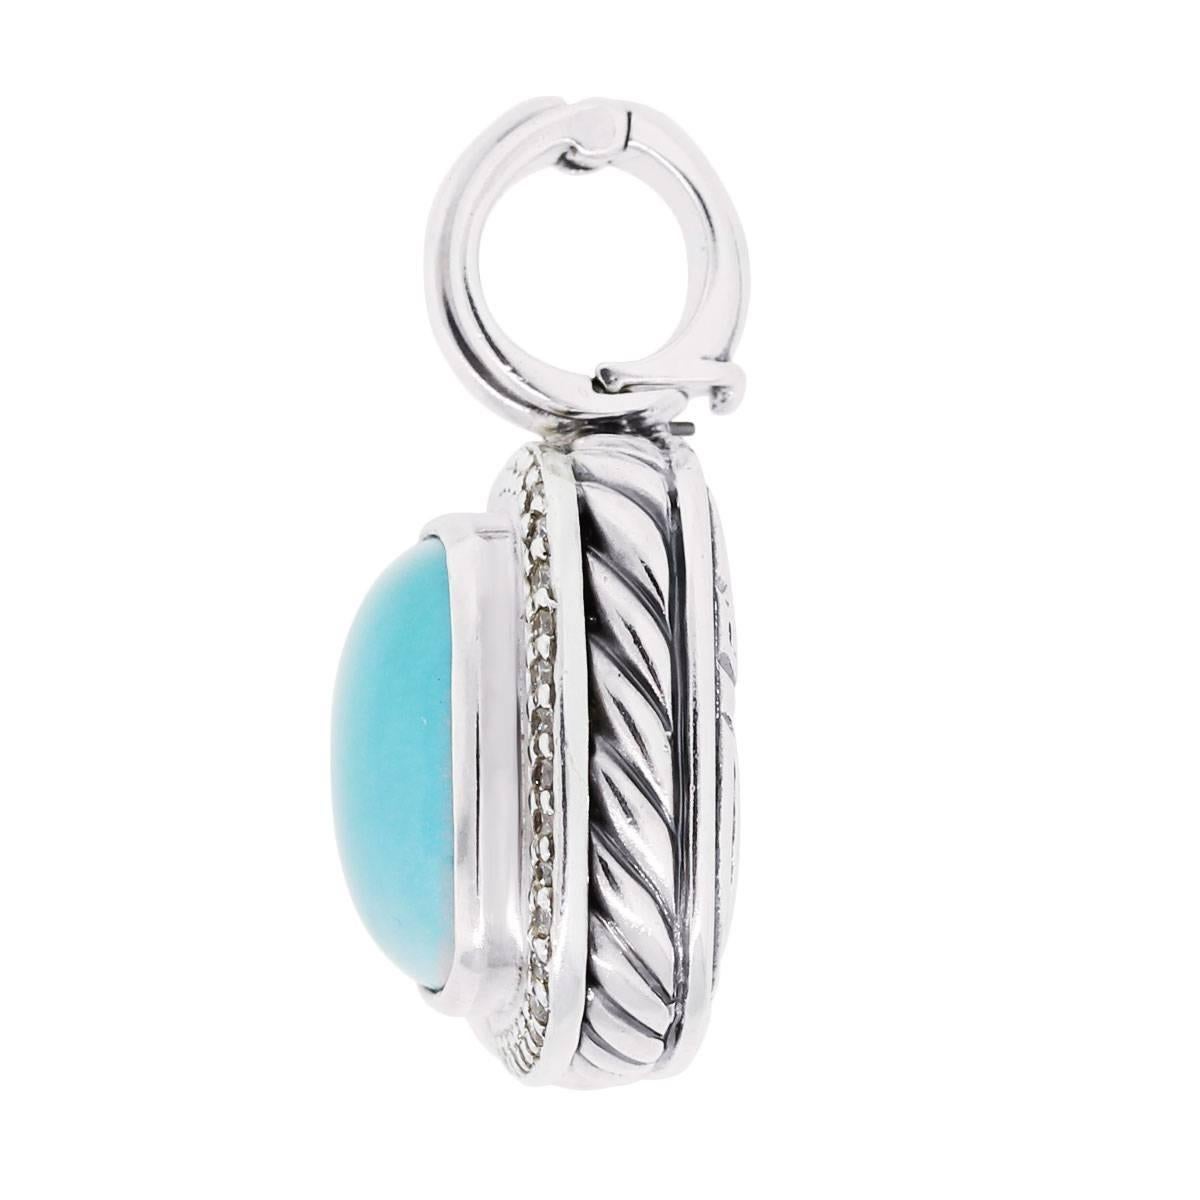 Designer: David Yurman
Material: Sterling Silver
Diamond Details: Round brilliant diamonds. Diamonds are G/H in color and VS in clarity
Gemstone Details: Turquoise
Measurements: 1.18